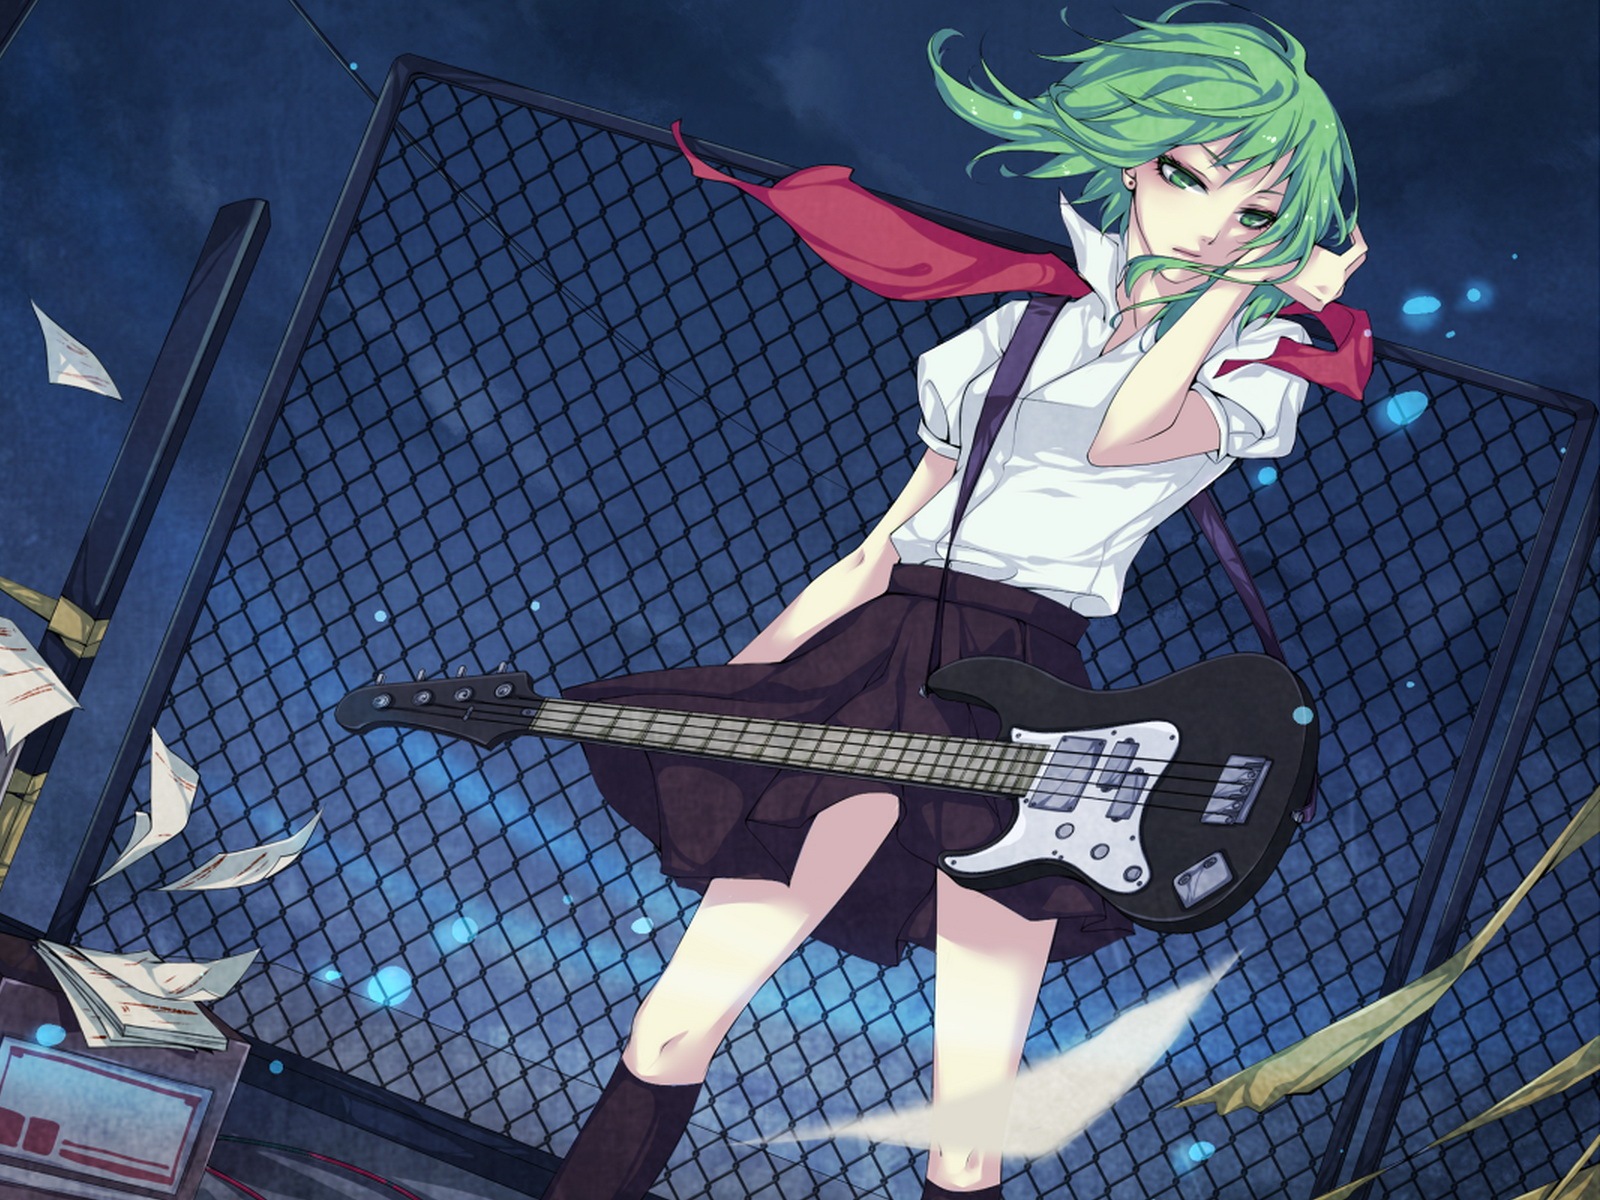 Musique guitare anime girl wallpapers HD #16 - 1600x1200